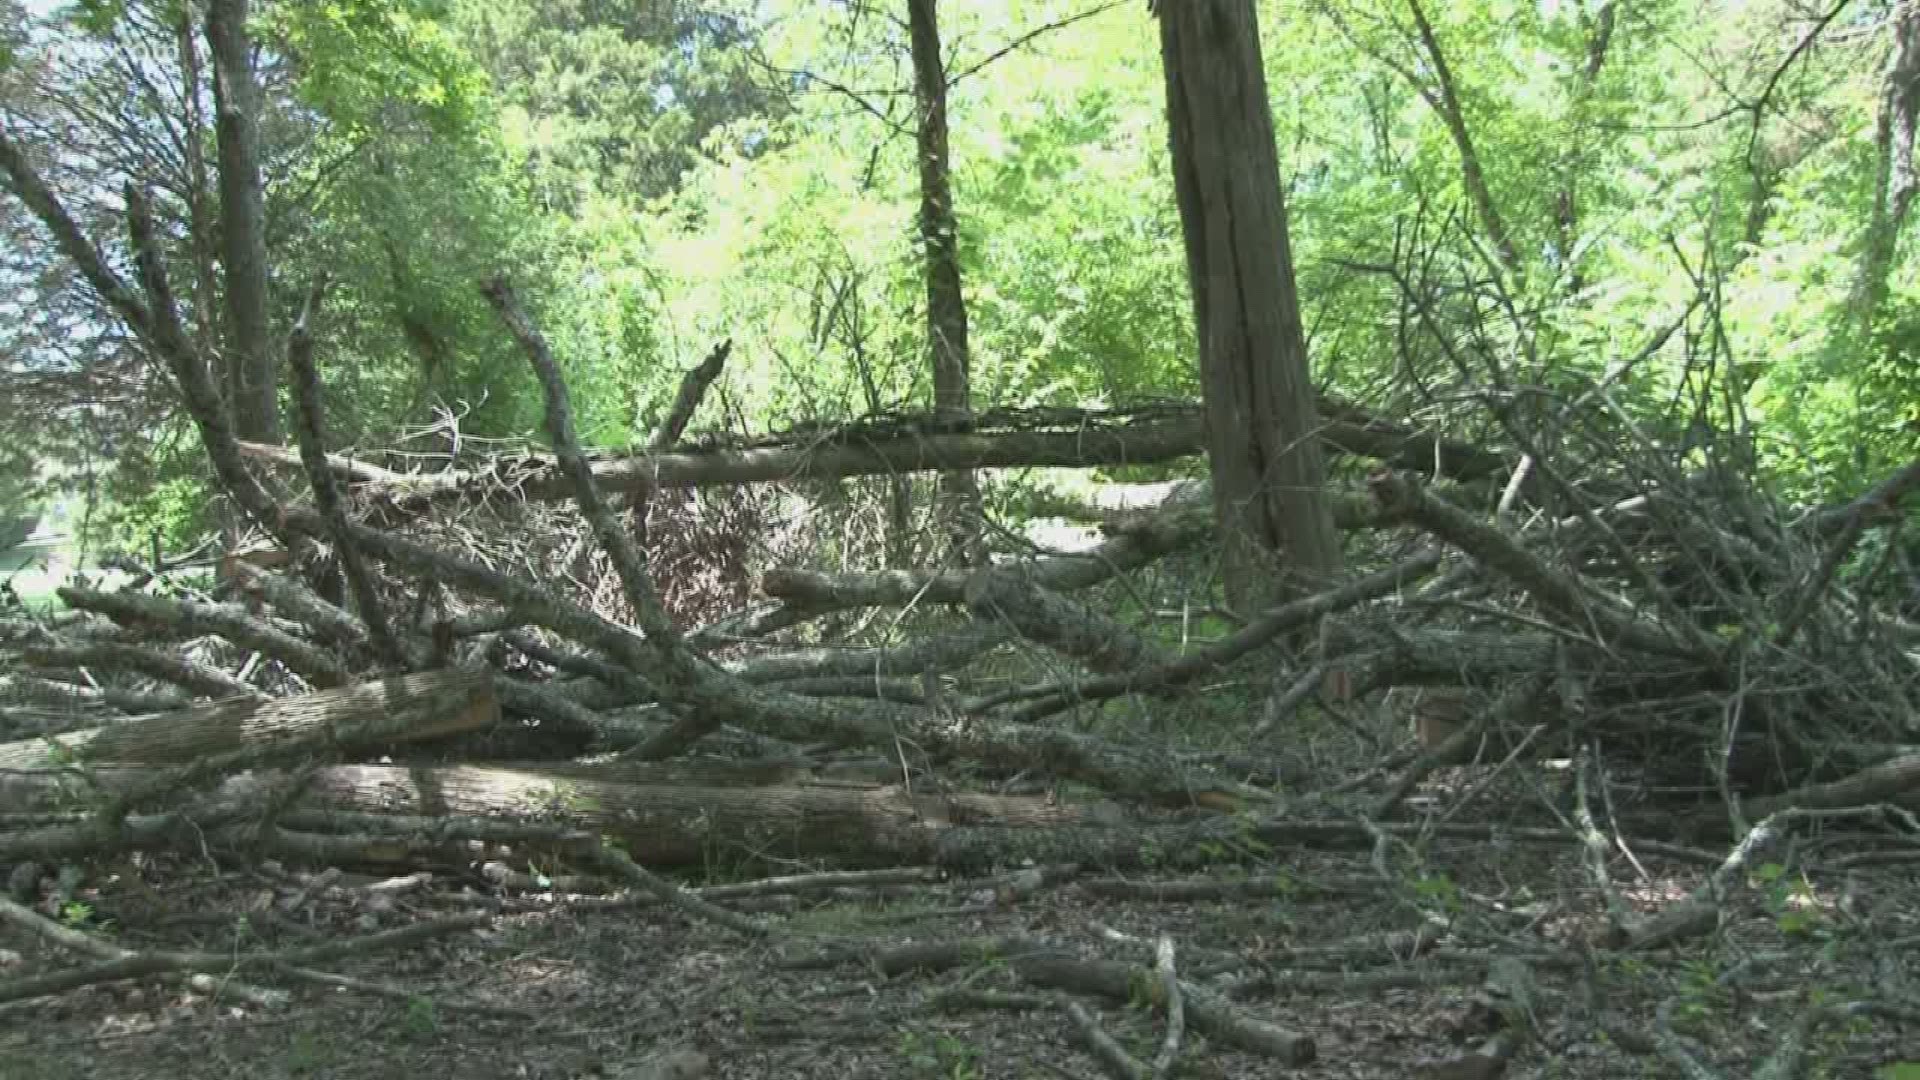 The grass and logs at the two city-owned disc golf courses in Oak Ridge have made it difficult for players to enjoy the course.